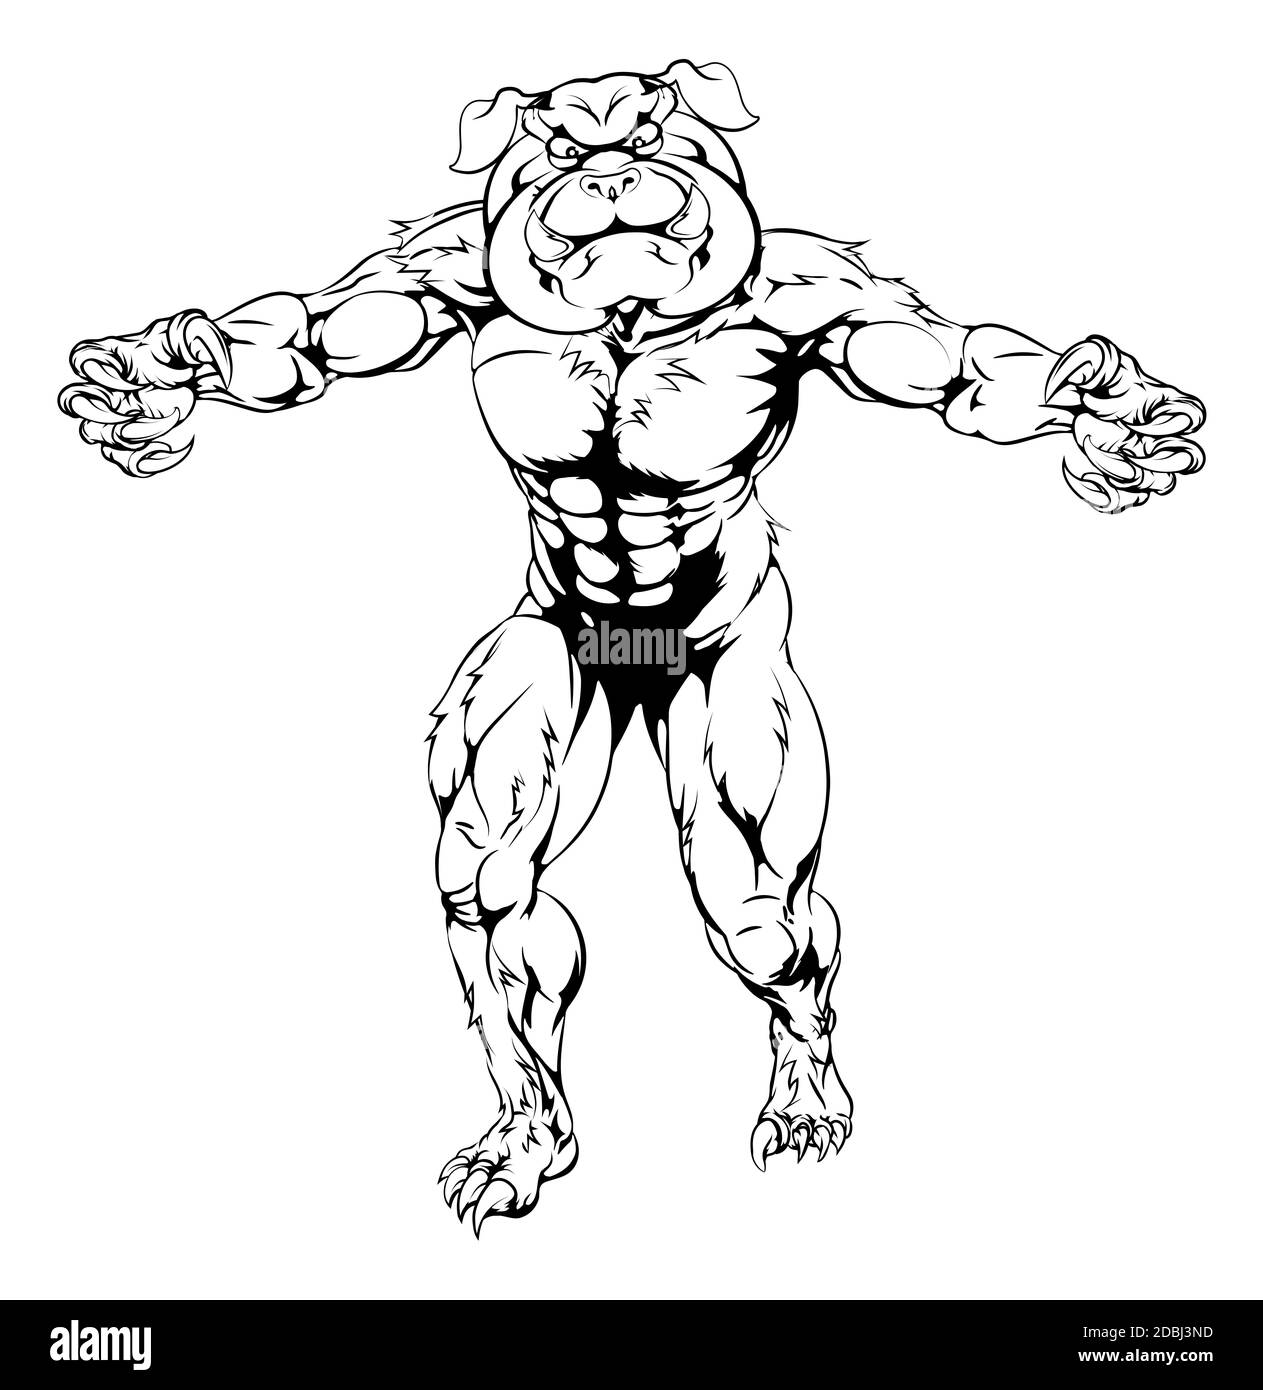 A mean tough muscular bulldog sports mascot character advancing with claws out Stock Photo